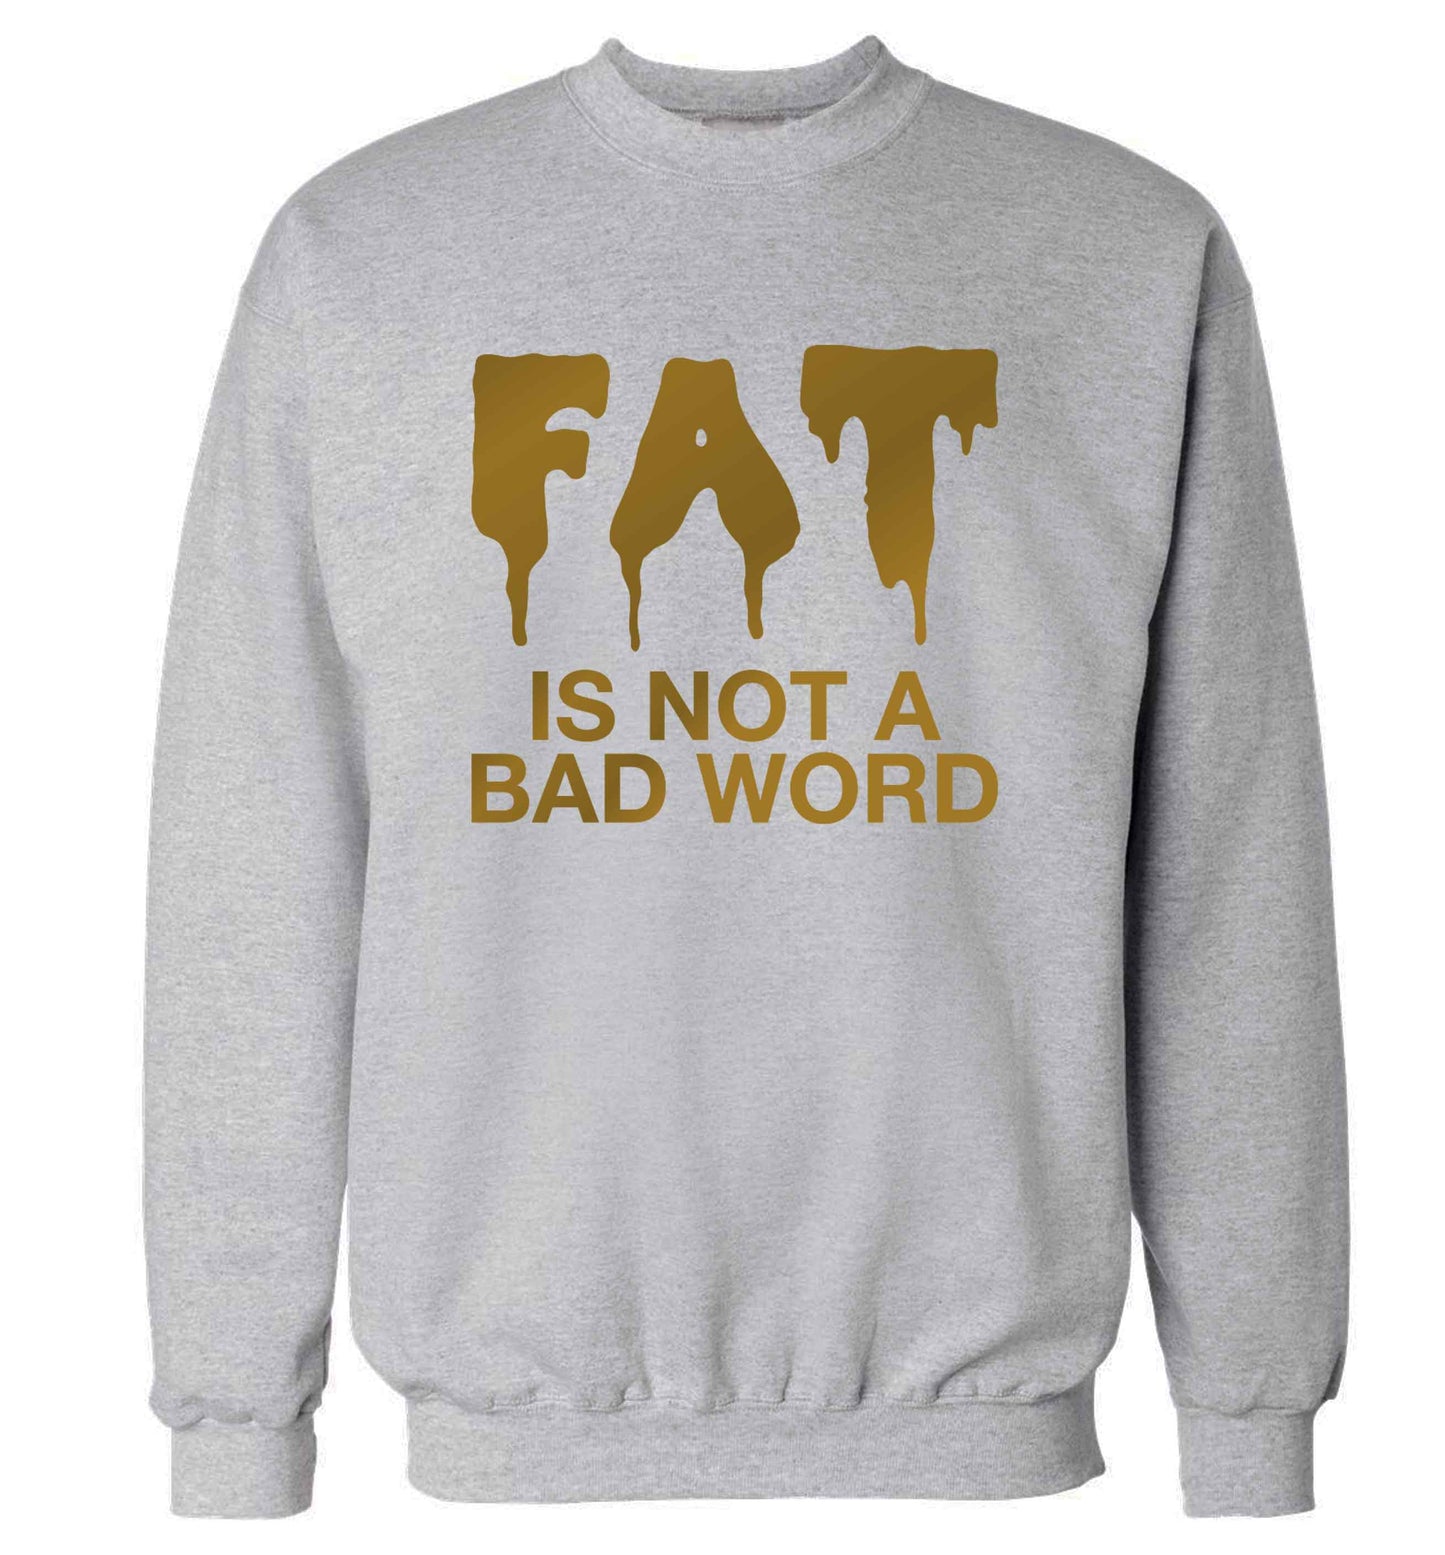 Fat is not a bad word adult's unisex grey sweater 2XL